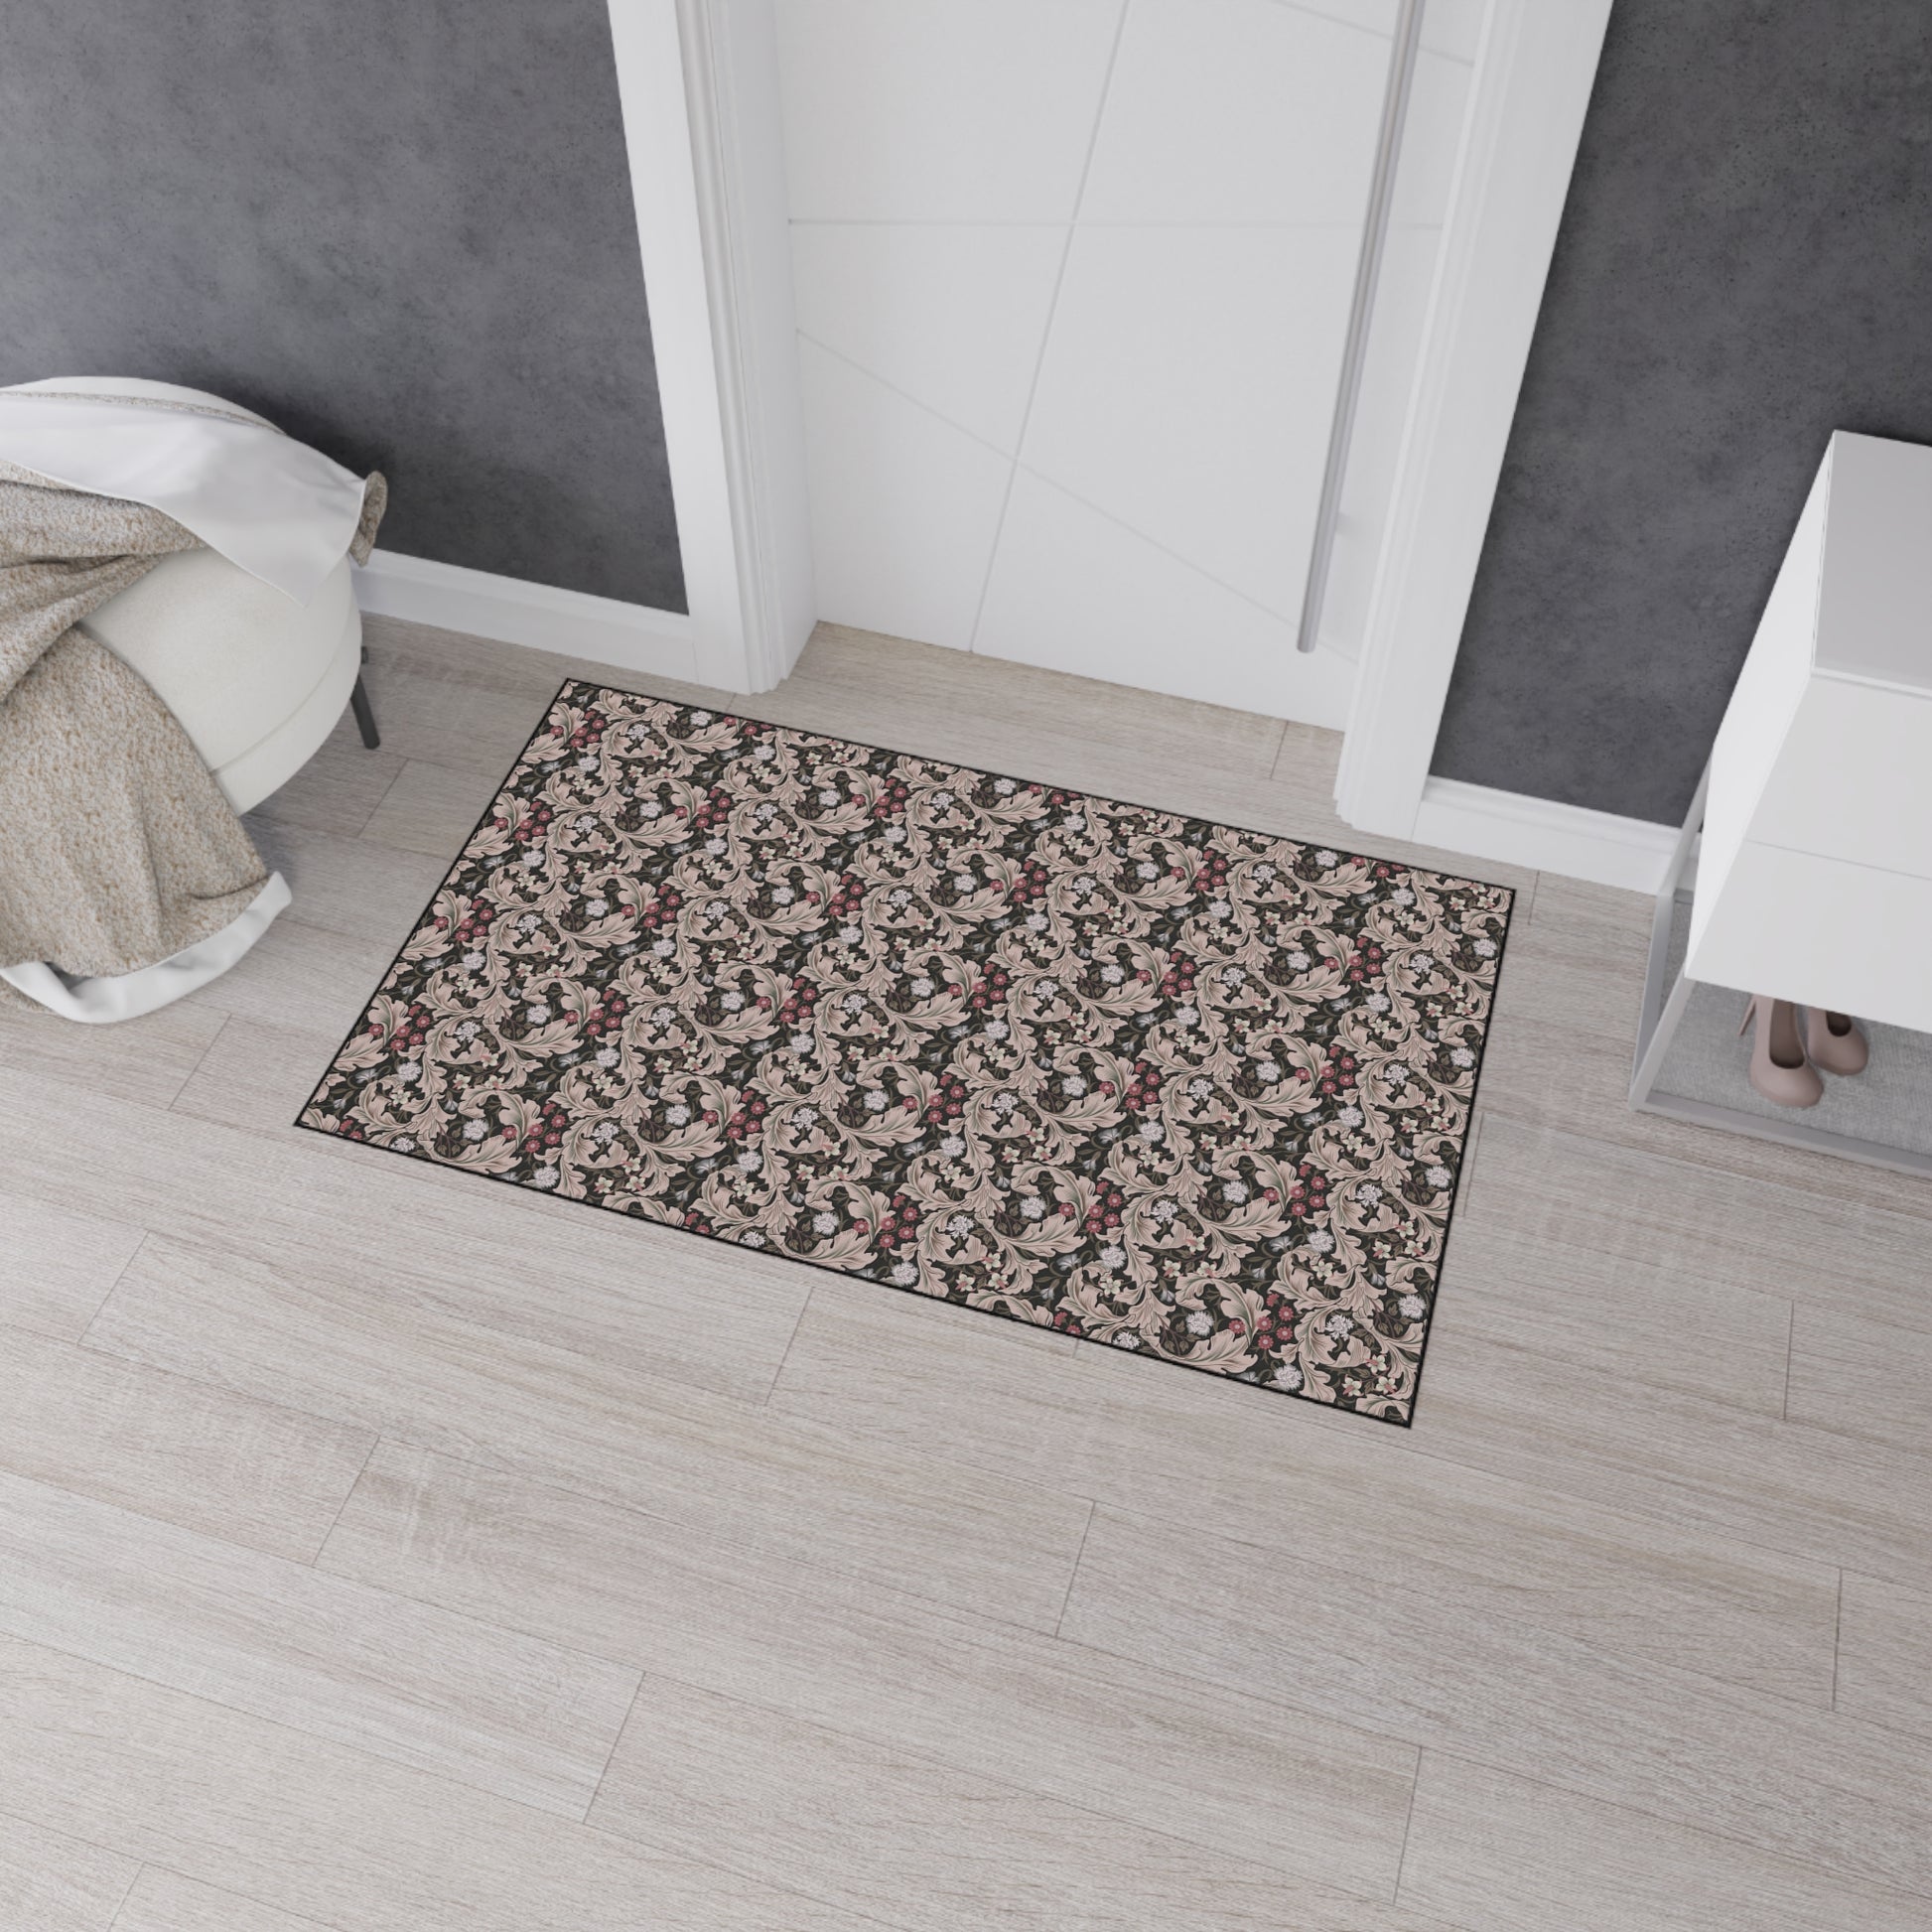 william-morris-co-heavy-duty-floor-mat-leicester-collection-mocha-17